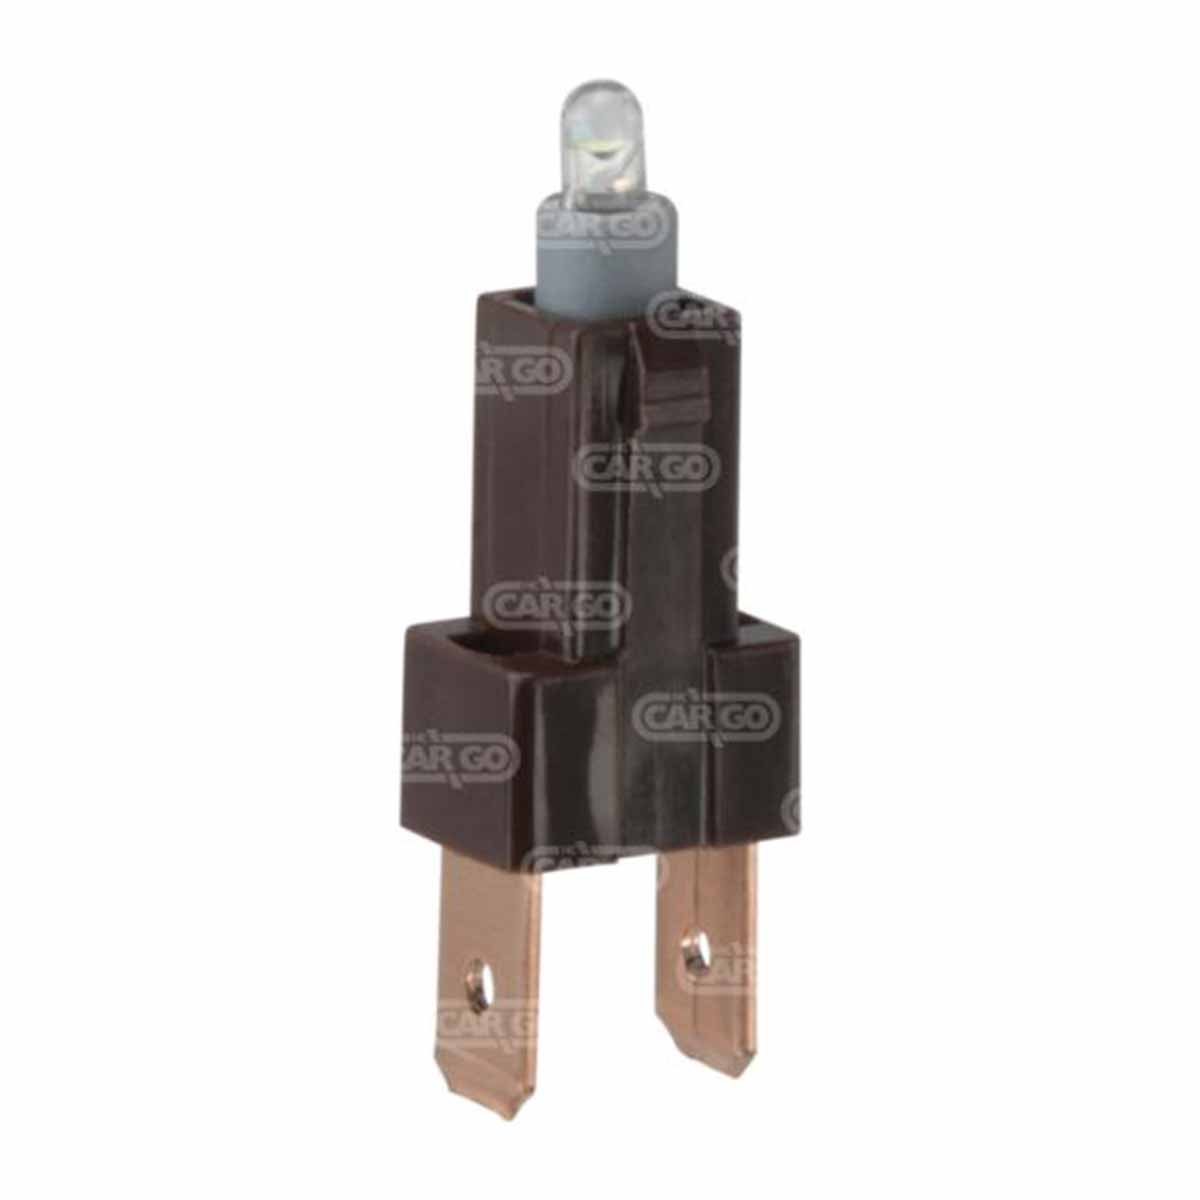 H4 socket plug with press in clamps, hella